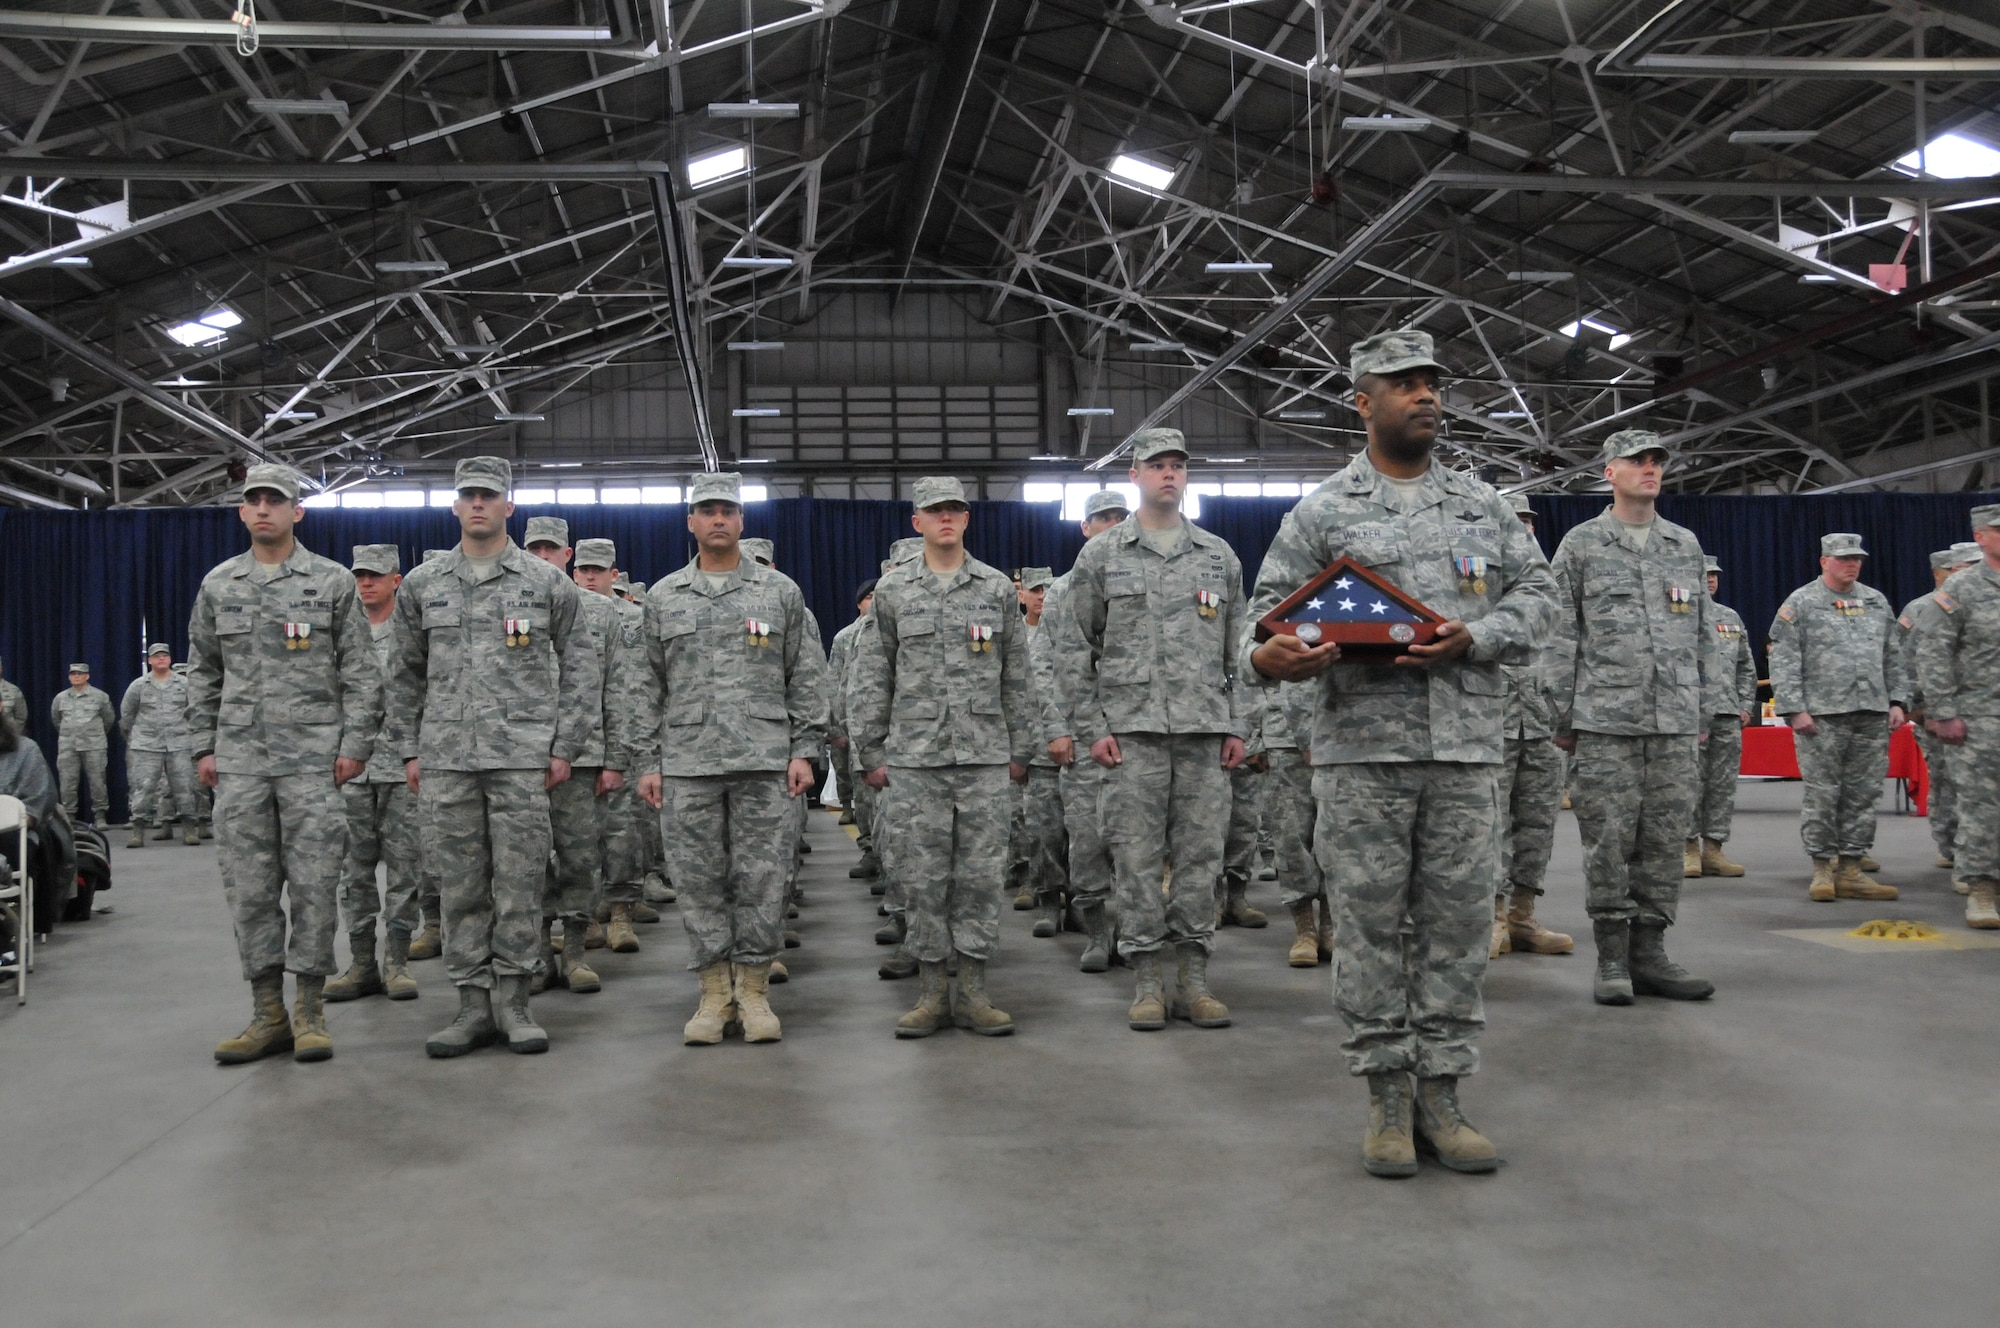 Col. Christopher Walker of the 103rd Air Operations Group stands as Commander of Troops with fellow Connecticut Air National Guardsmen during a formal Joint Freedom Salute Ceremony in the main hangar at Bradley Air National Guard Base in East Granby, Conn. March 31, 2012. Airmen and Soldiers of the Connecticut National Guard were formally welcomed home and honored following deployments over the past year. (U.S. Air Force photo by Tech. Sgt. Erin McNamara\RELEASED)